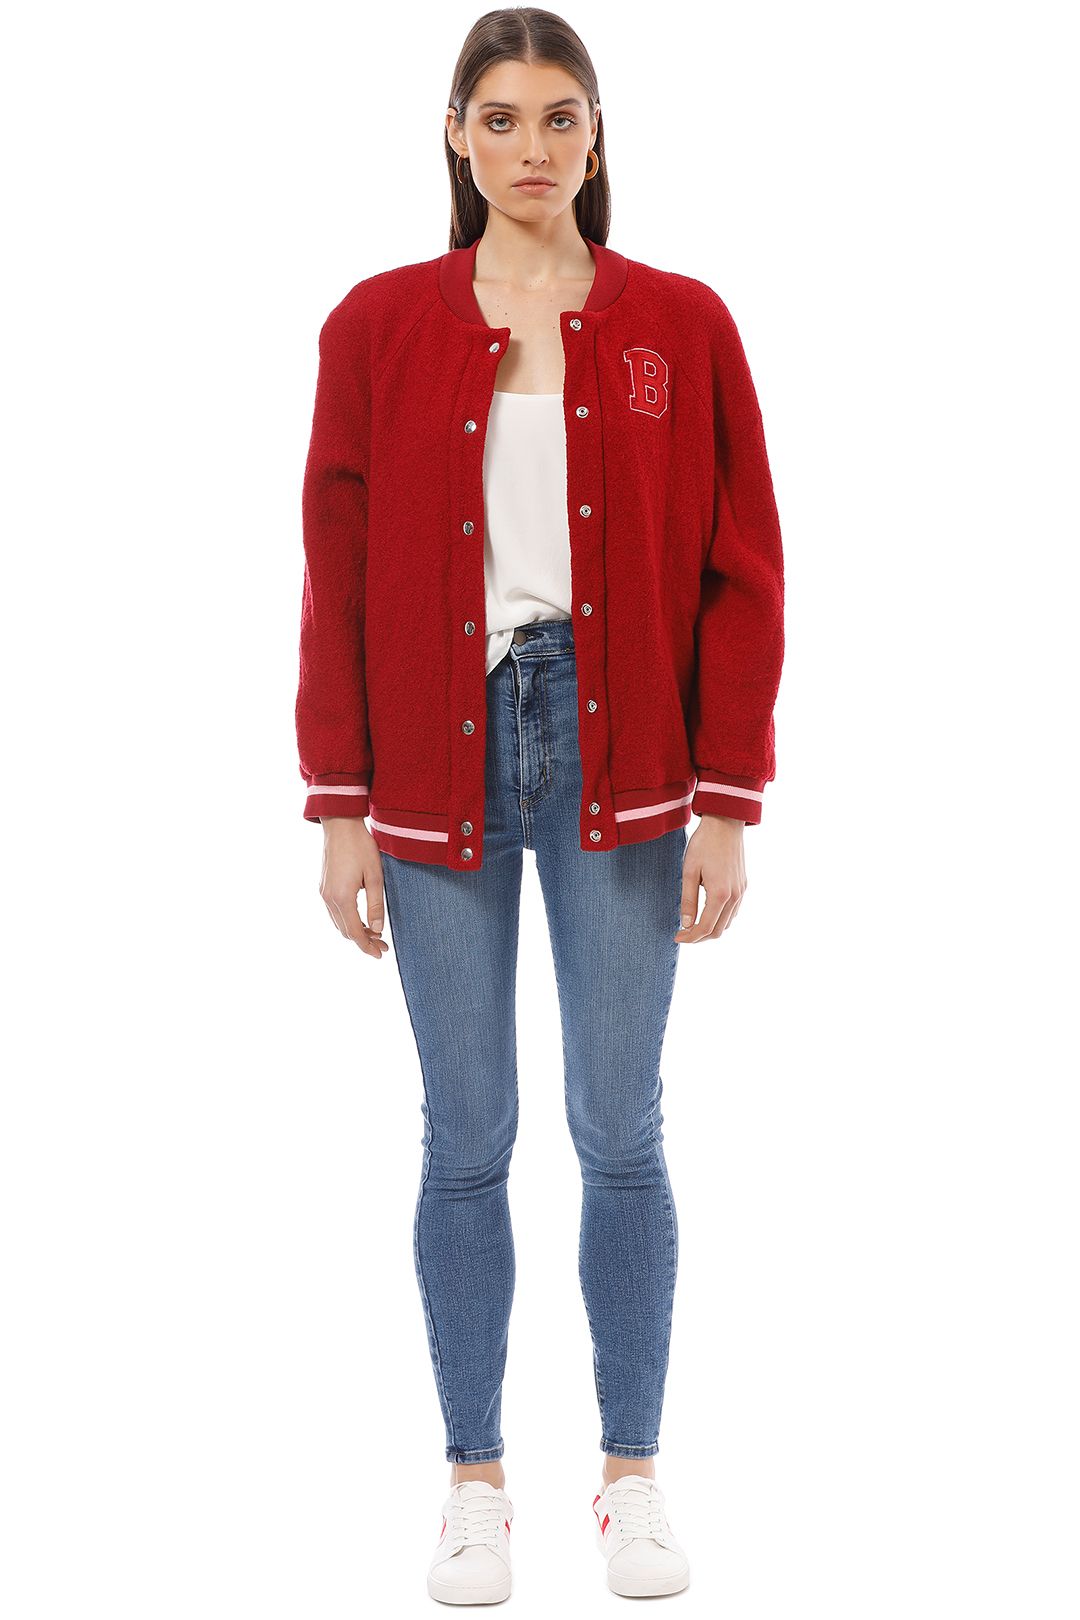 Bec and Bridge - Be Mine Bomber - Red - Front